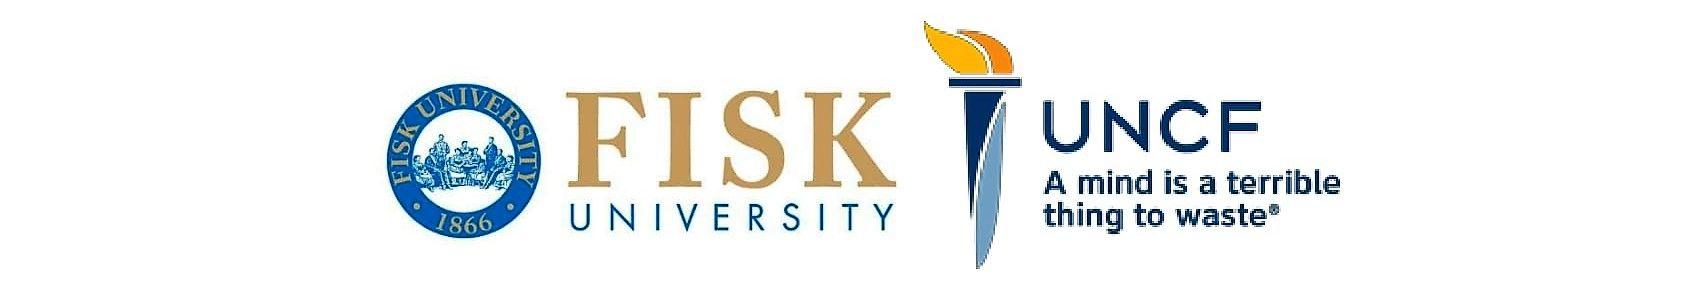 UNCF Logo - New UNCF Study Confirms that Fisk University Contributes to Local ...